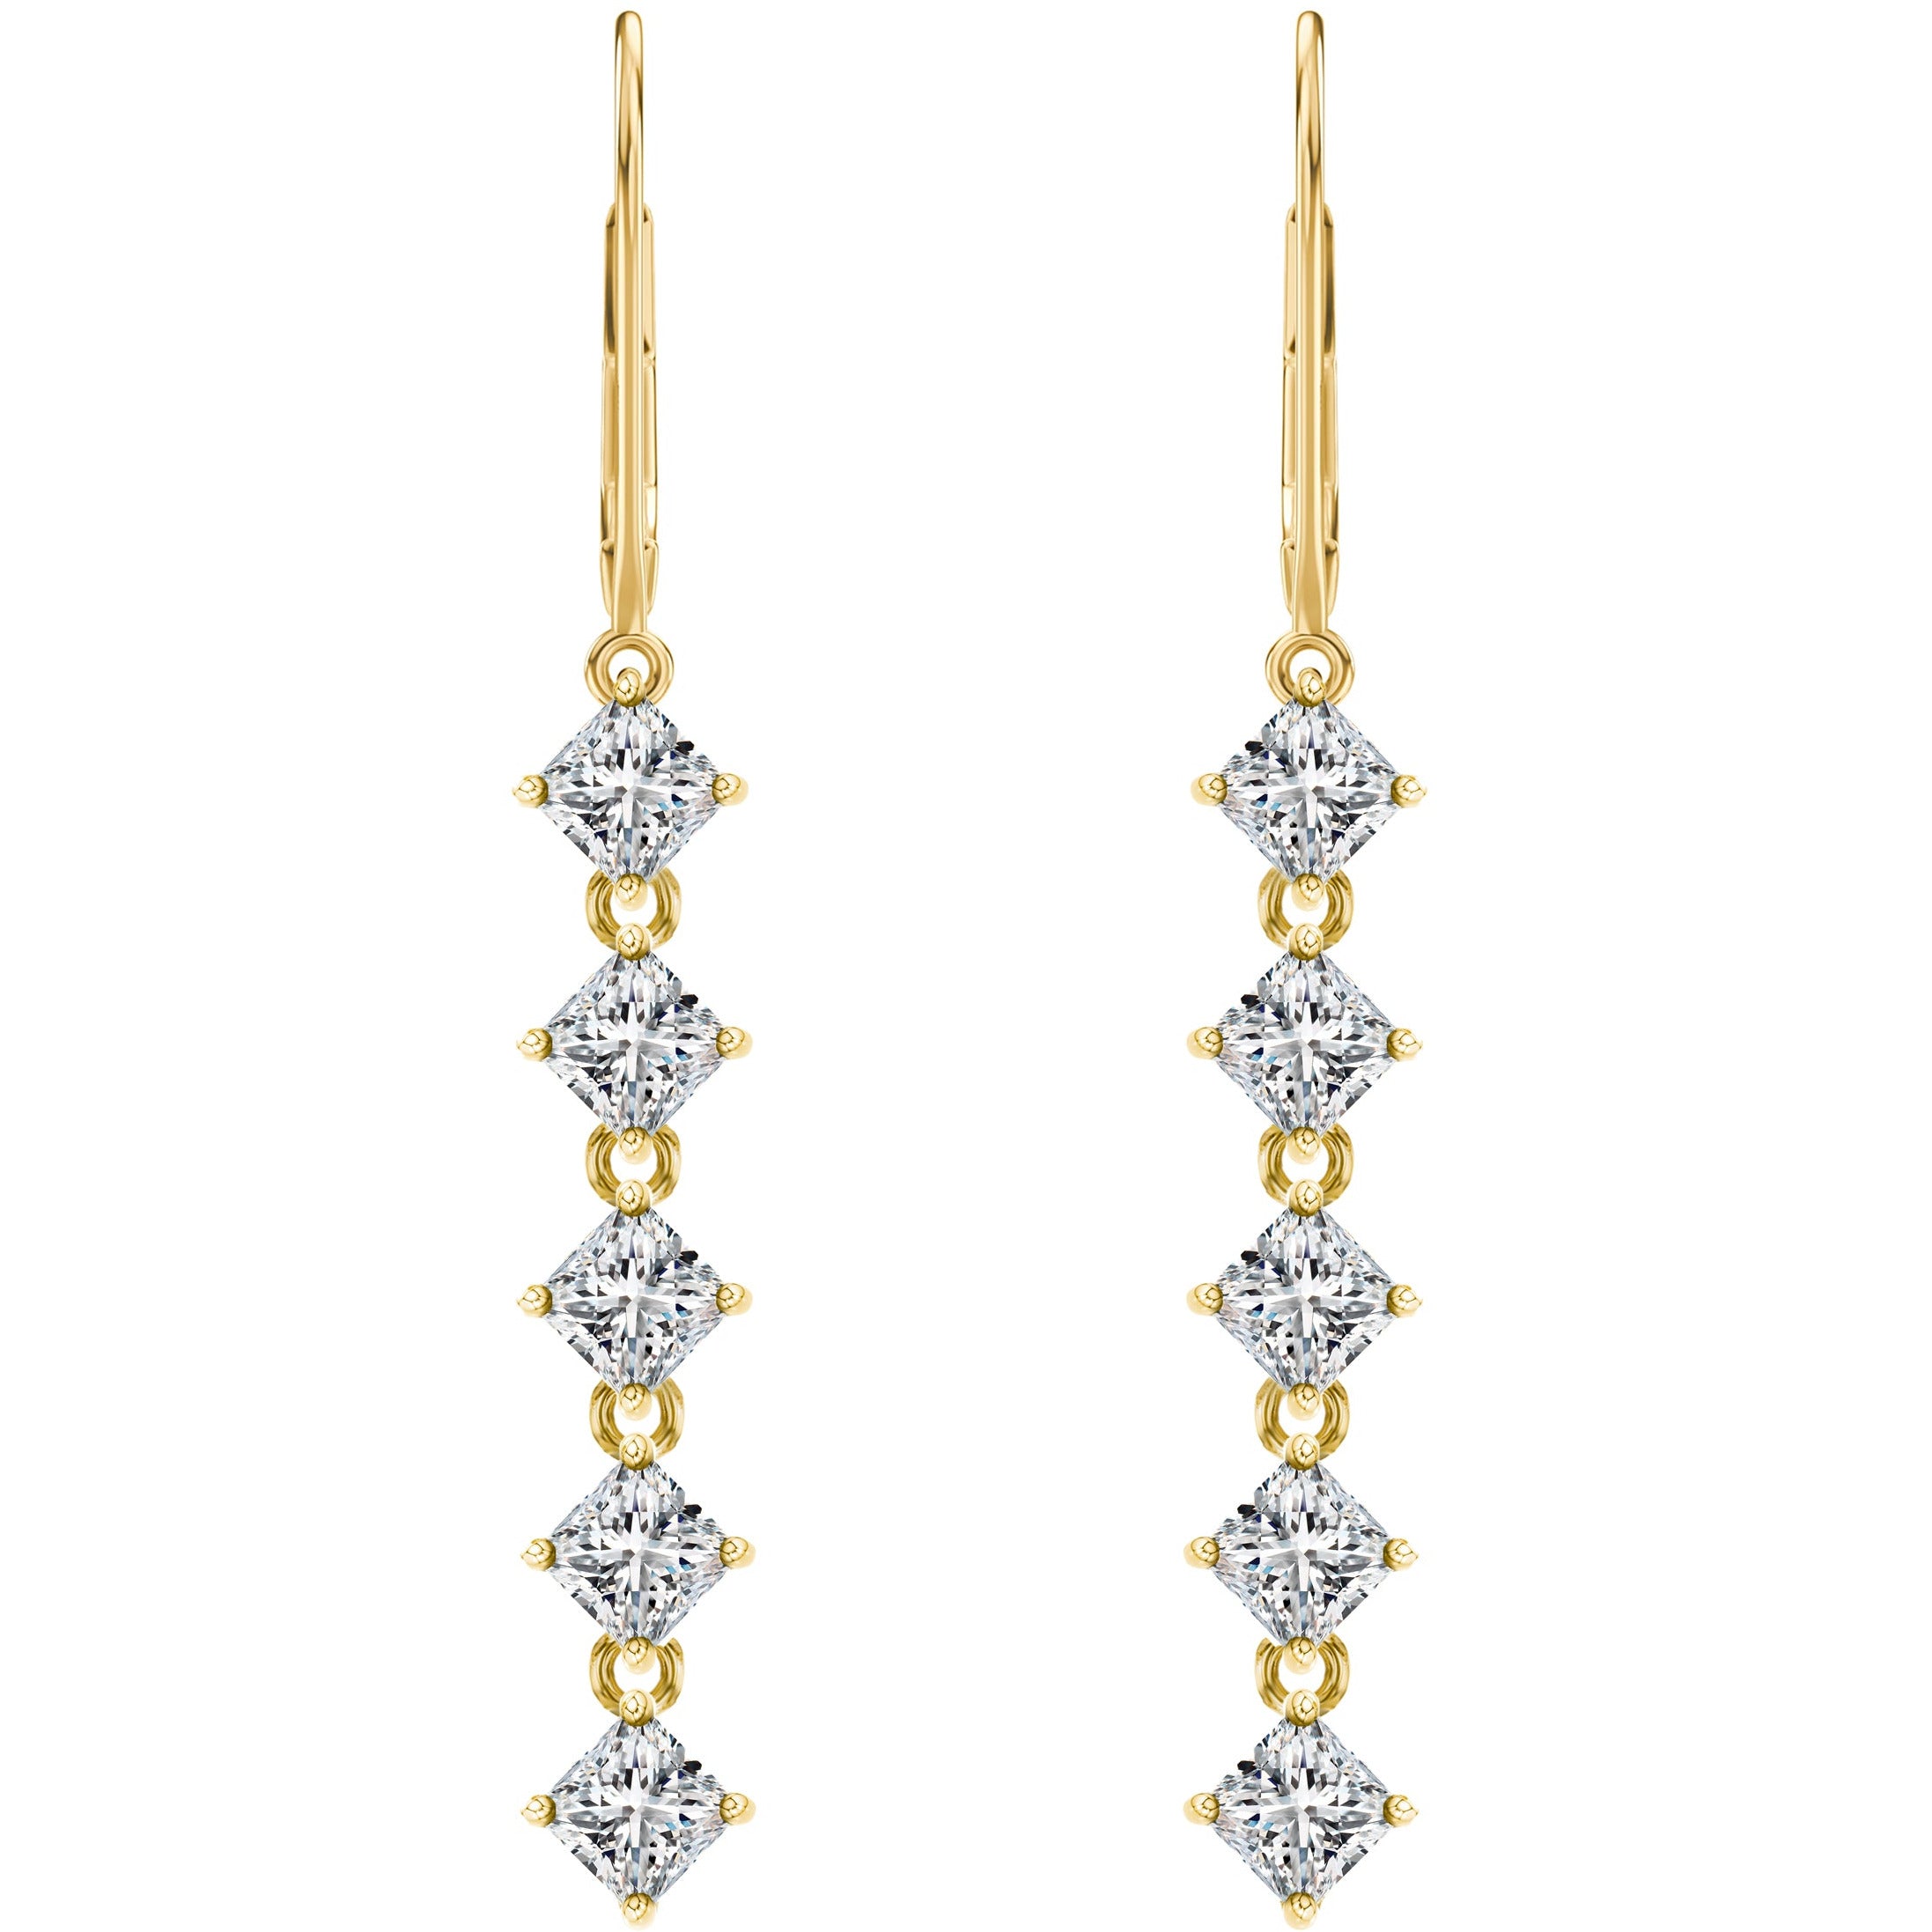 Shimansky - My Girl 10 Drop Diamond Earrings 1.00ct Crafted in 14K Yellow Gold